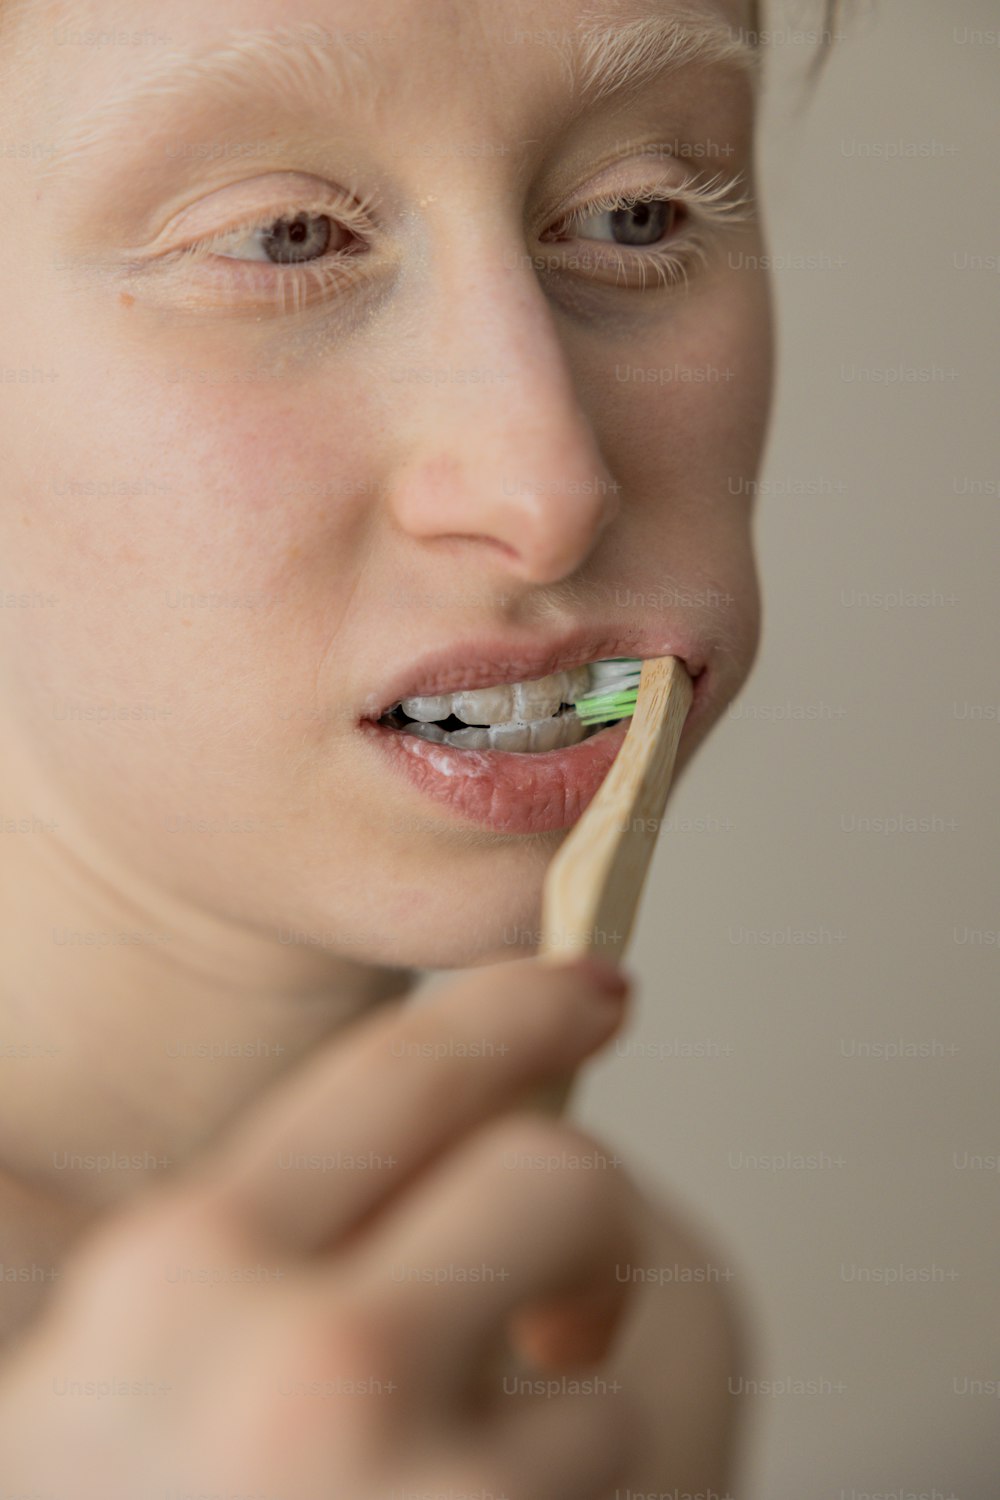 a woman brushing her teeth with a toothbrush